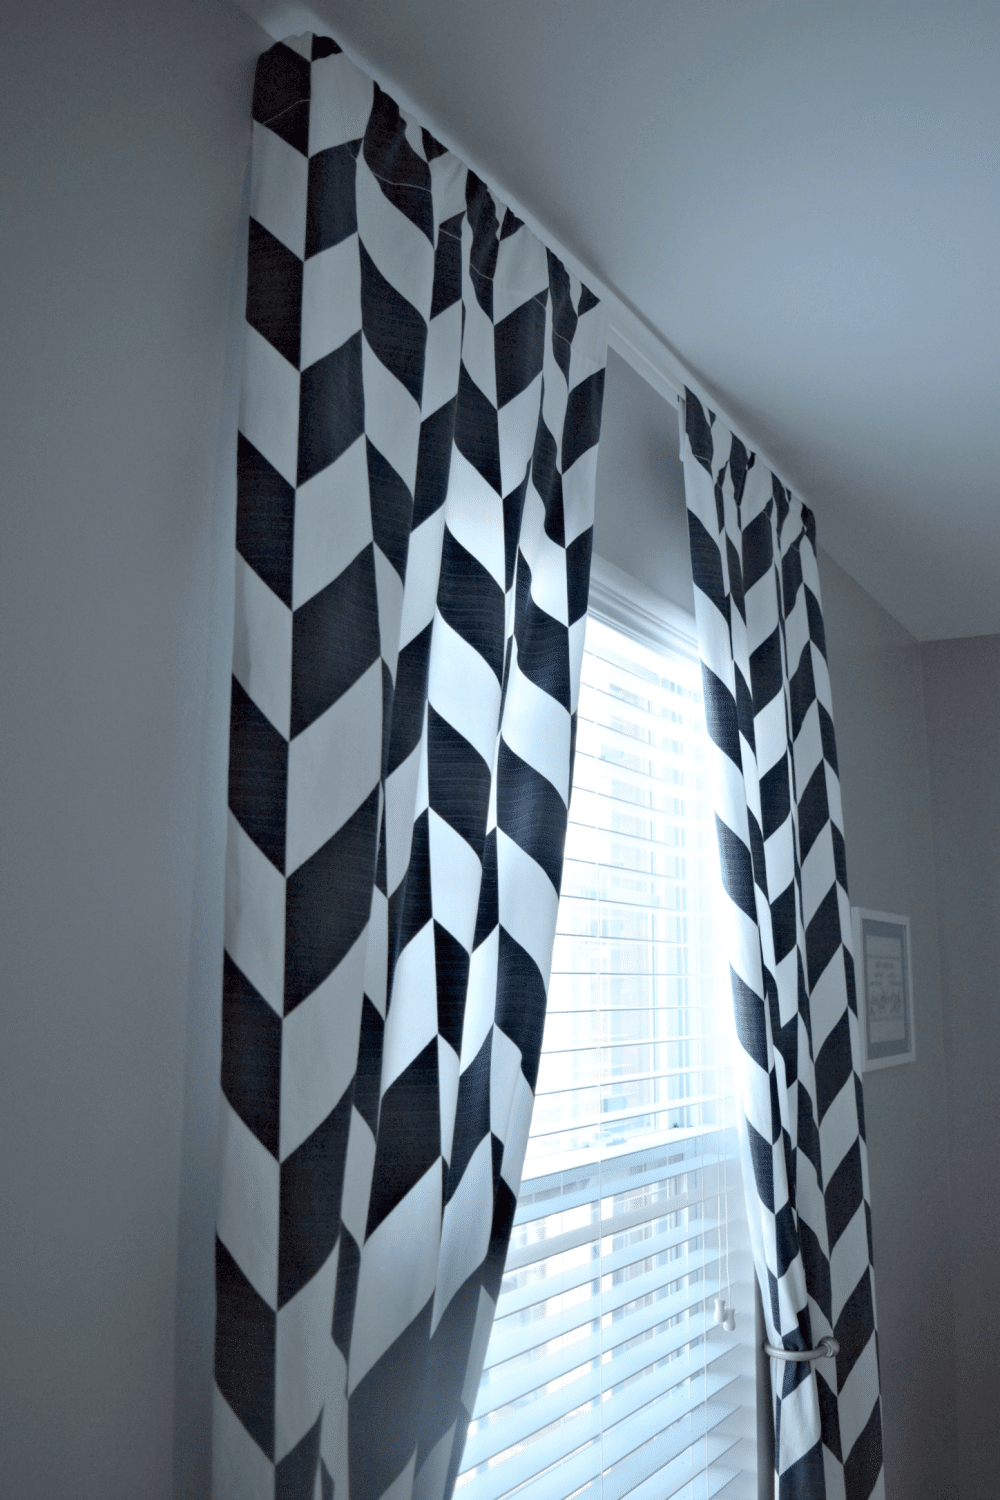 DIy panel curtains made with store bought black and white checkered fabric